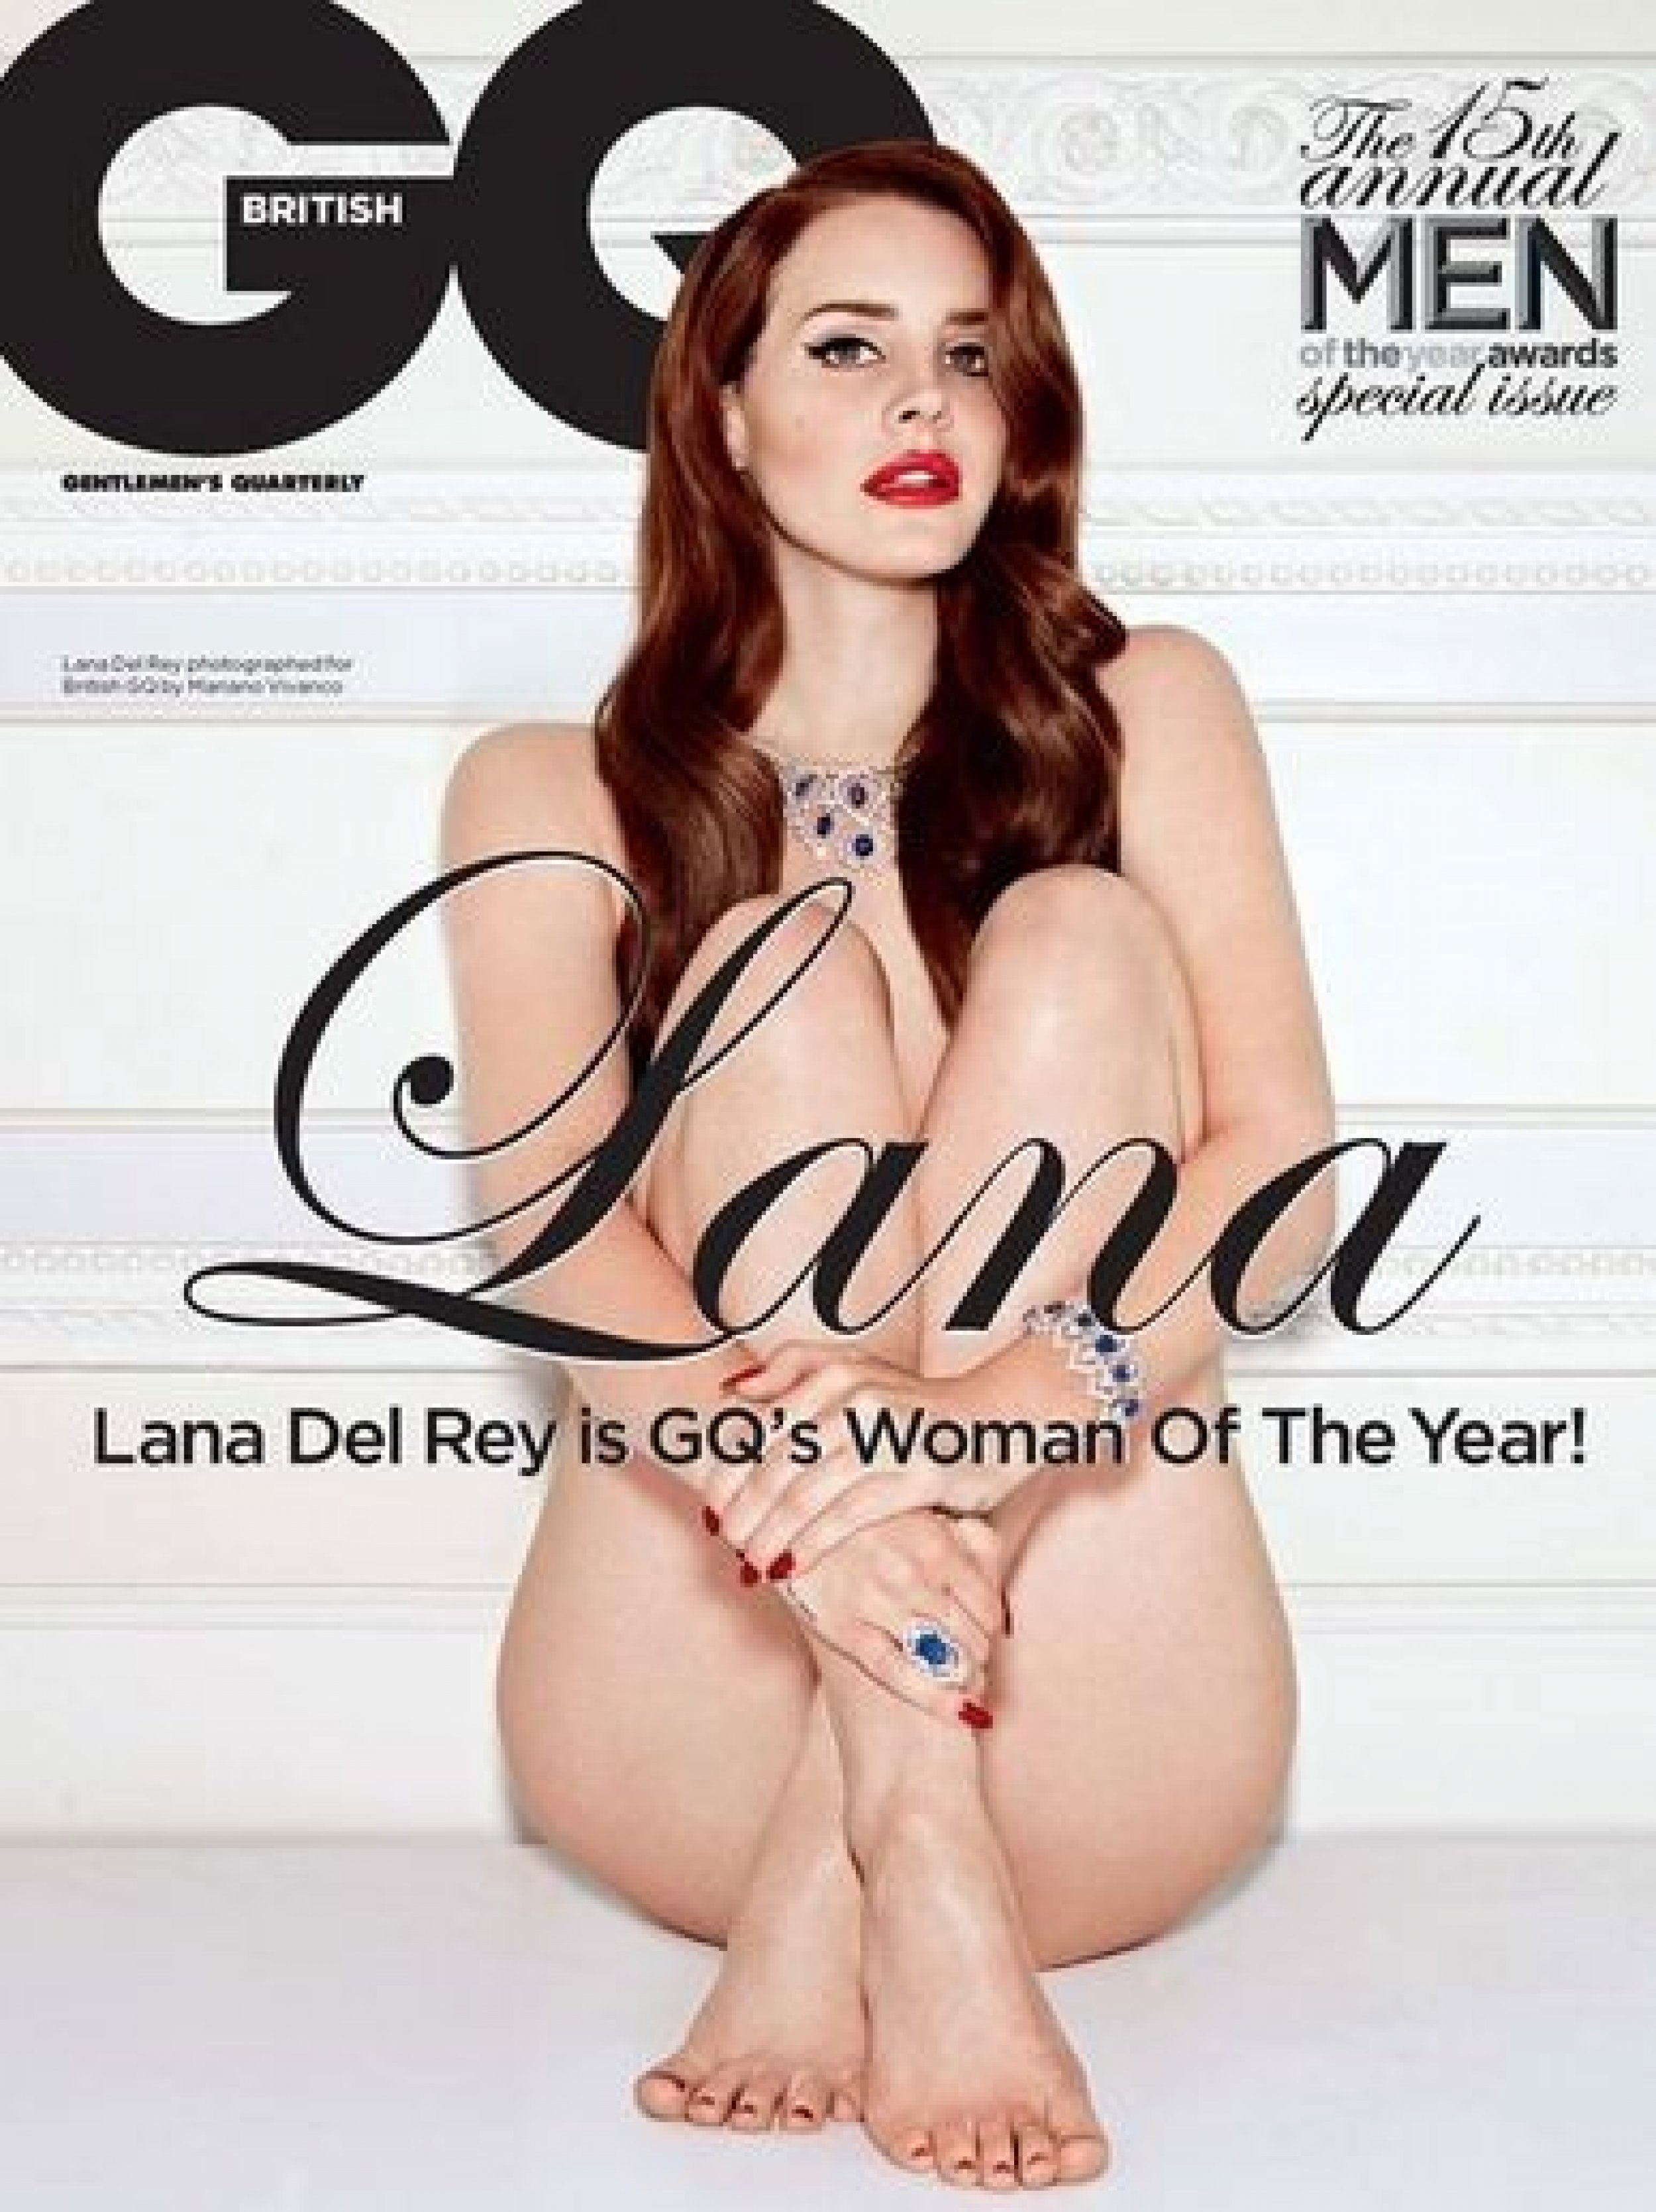 Lana Del Rey Poses Nude in GQ; Why Its Not Sexist IBTimes pic